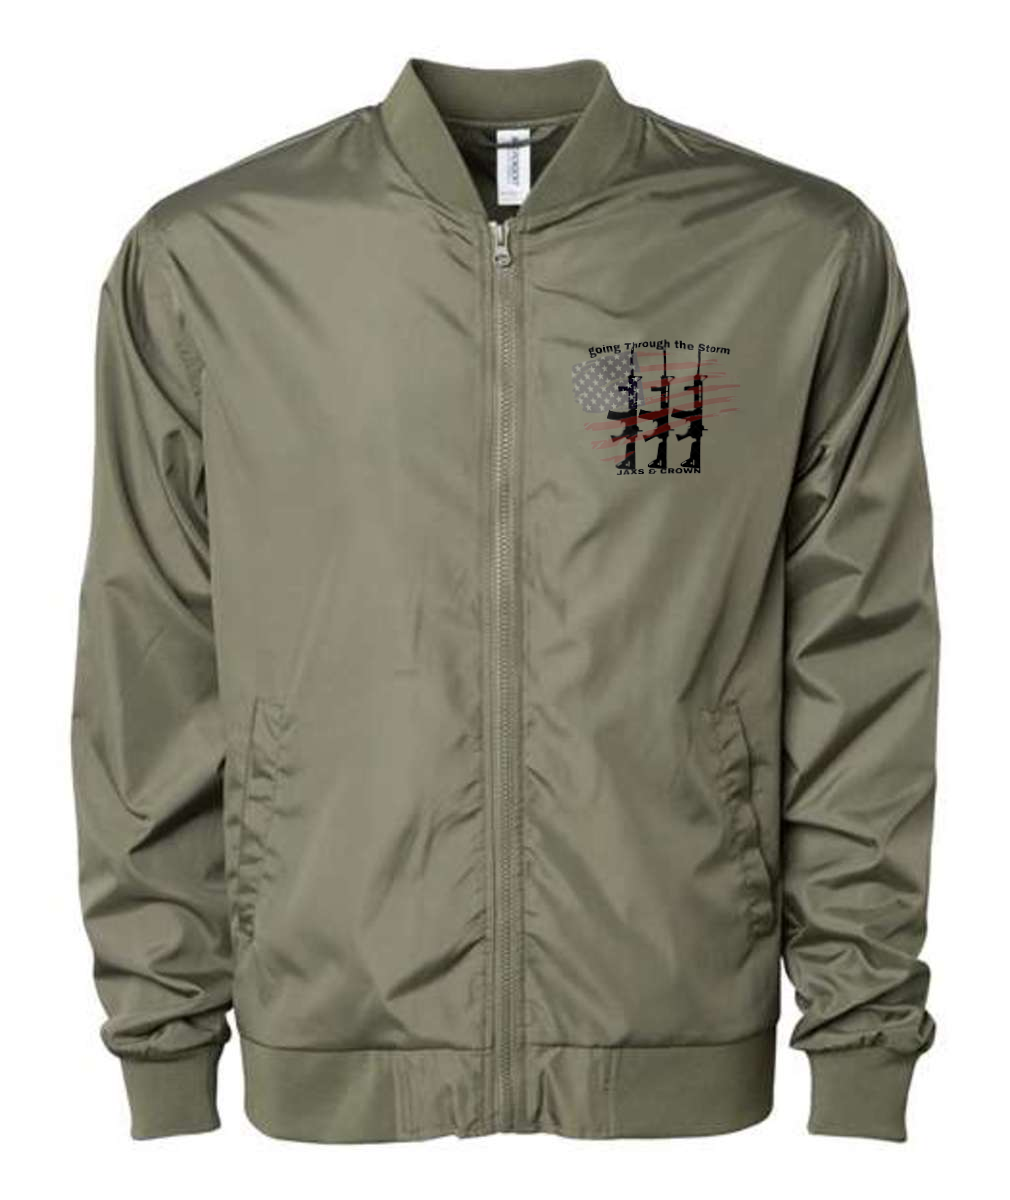 Jaxs & crown gtts Embroidered Independent Trading Co. - Lightweight Bomber Jacket or Similar